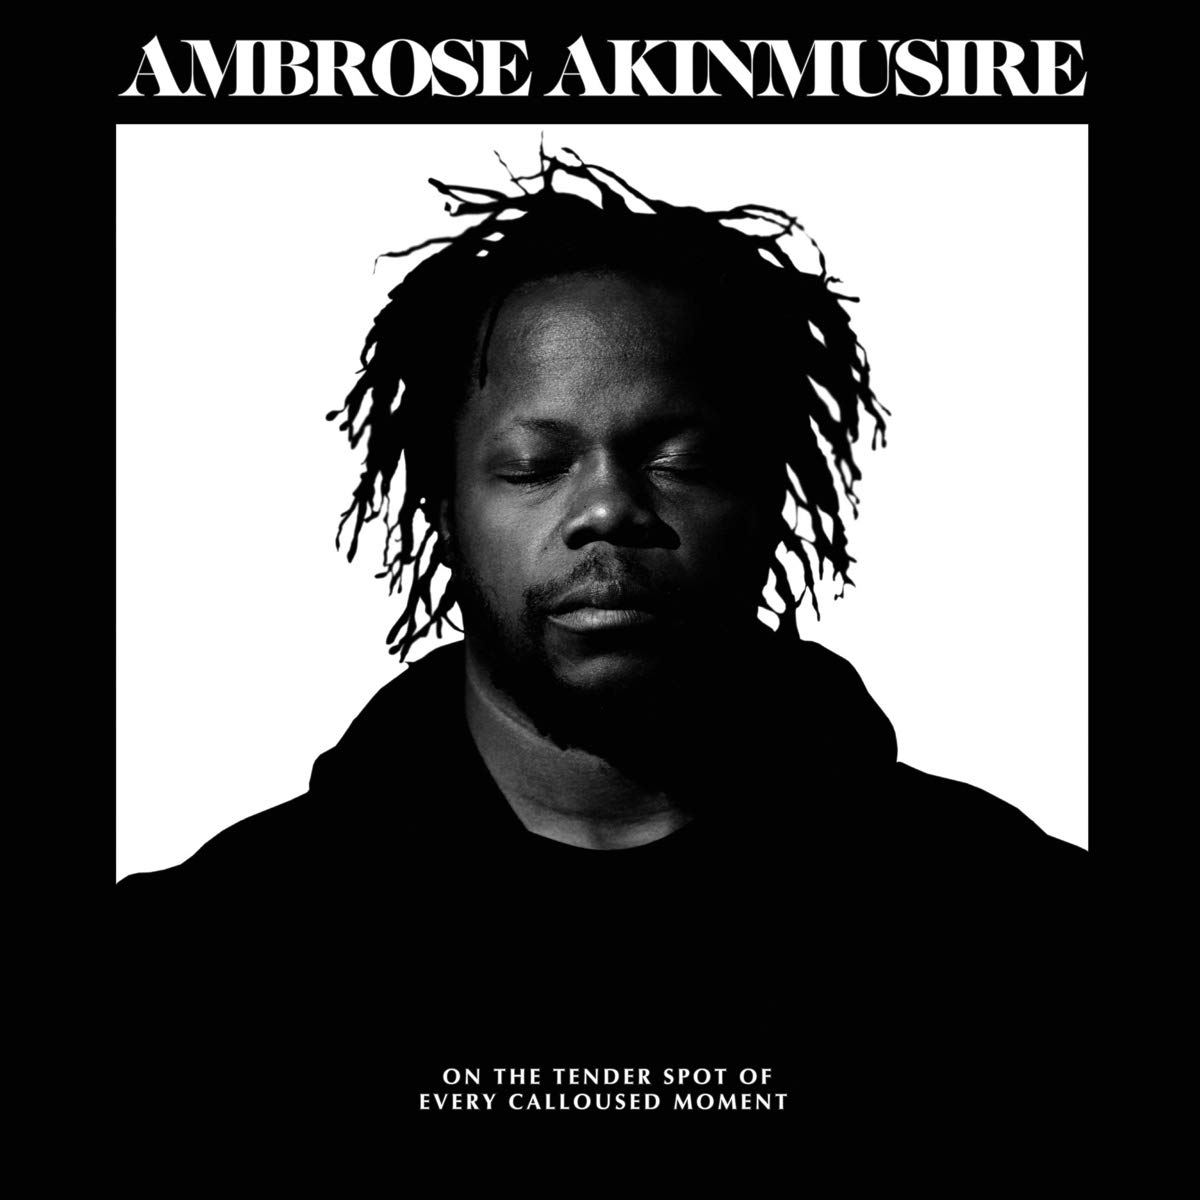 CD Shop - AMBROSE AKINMUSIRE ON THE TENDER SPOT OF EVERY CALLOUSED MOMENT